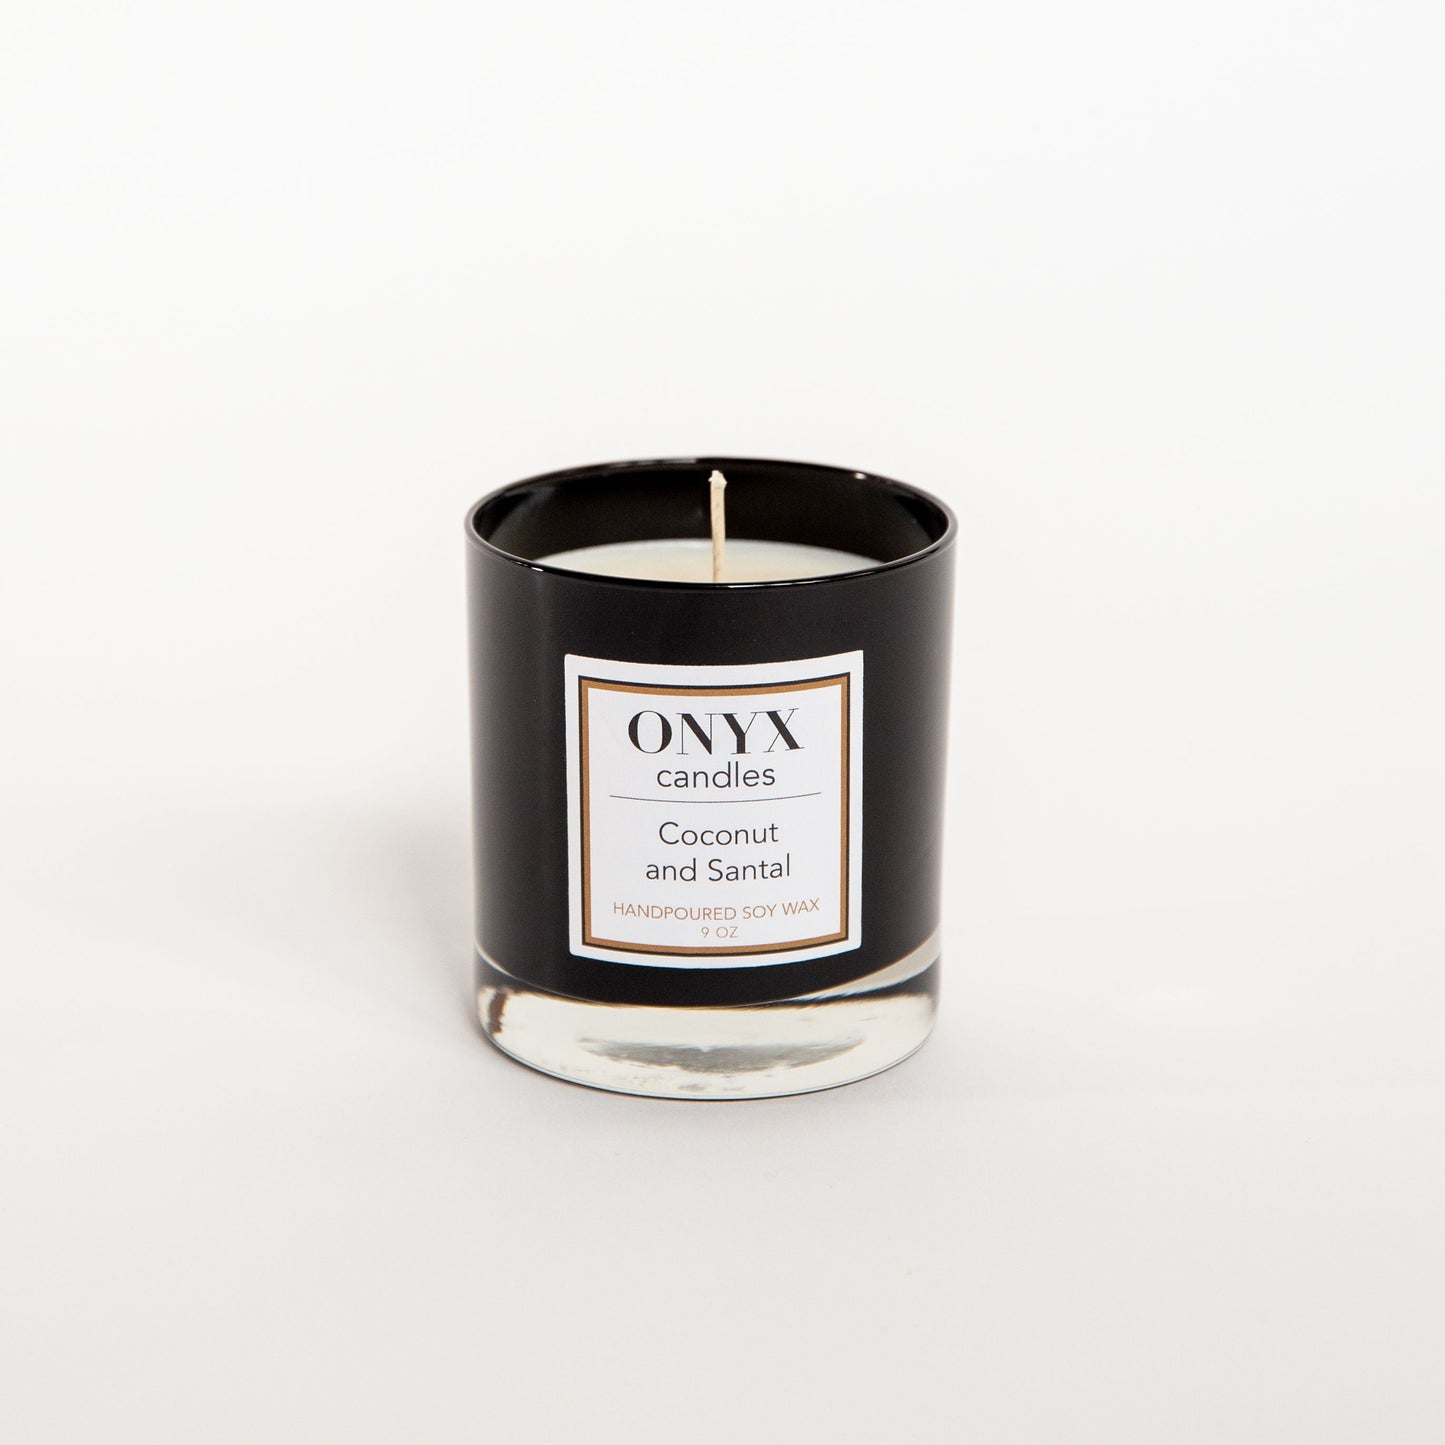 Coconut and Santal candle in a 9 oz black glass jar